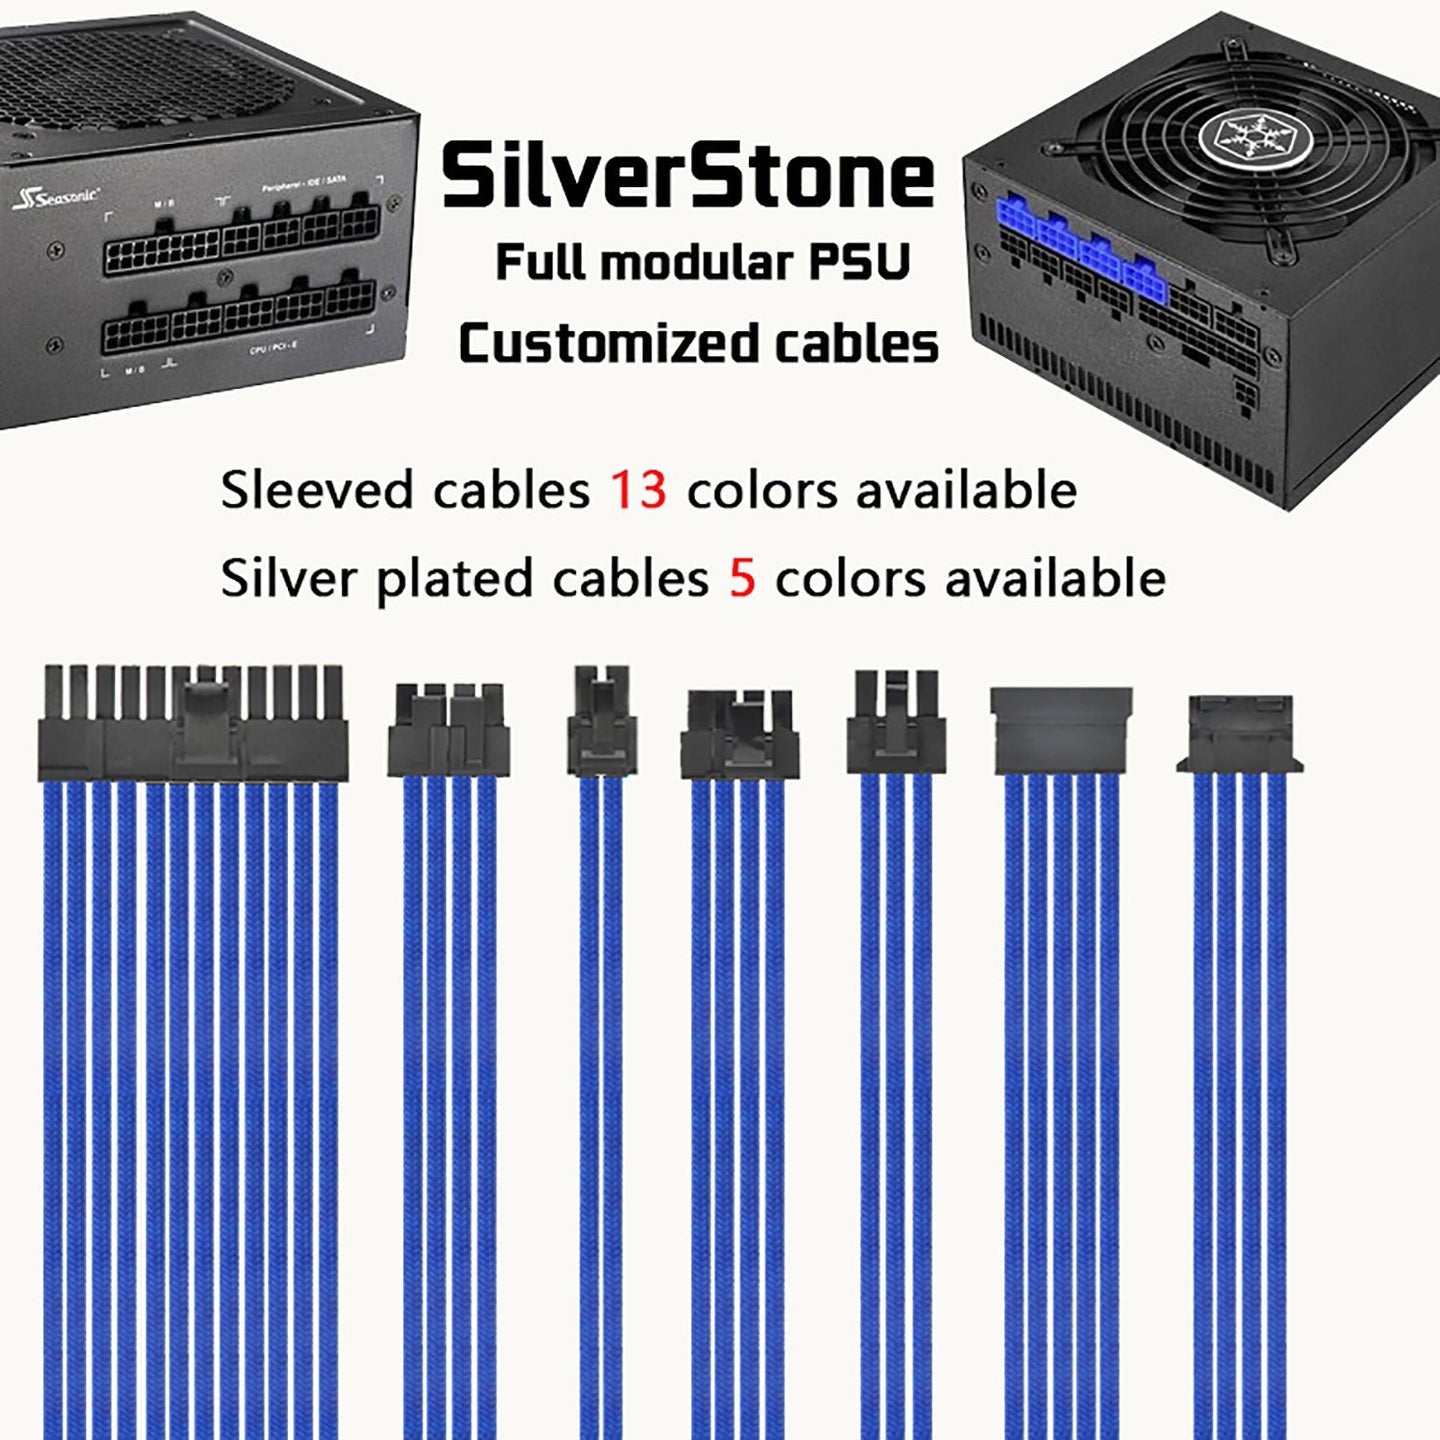 silverstone full modular psu cables customized sleeved sliverplated cables